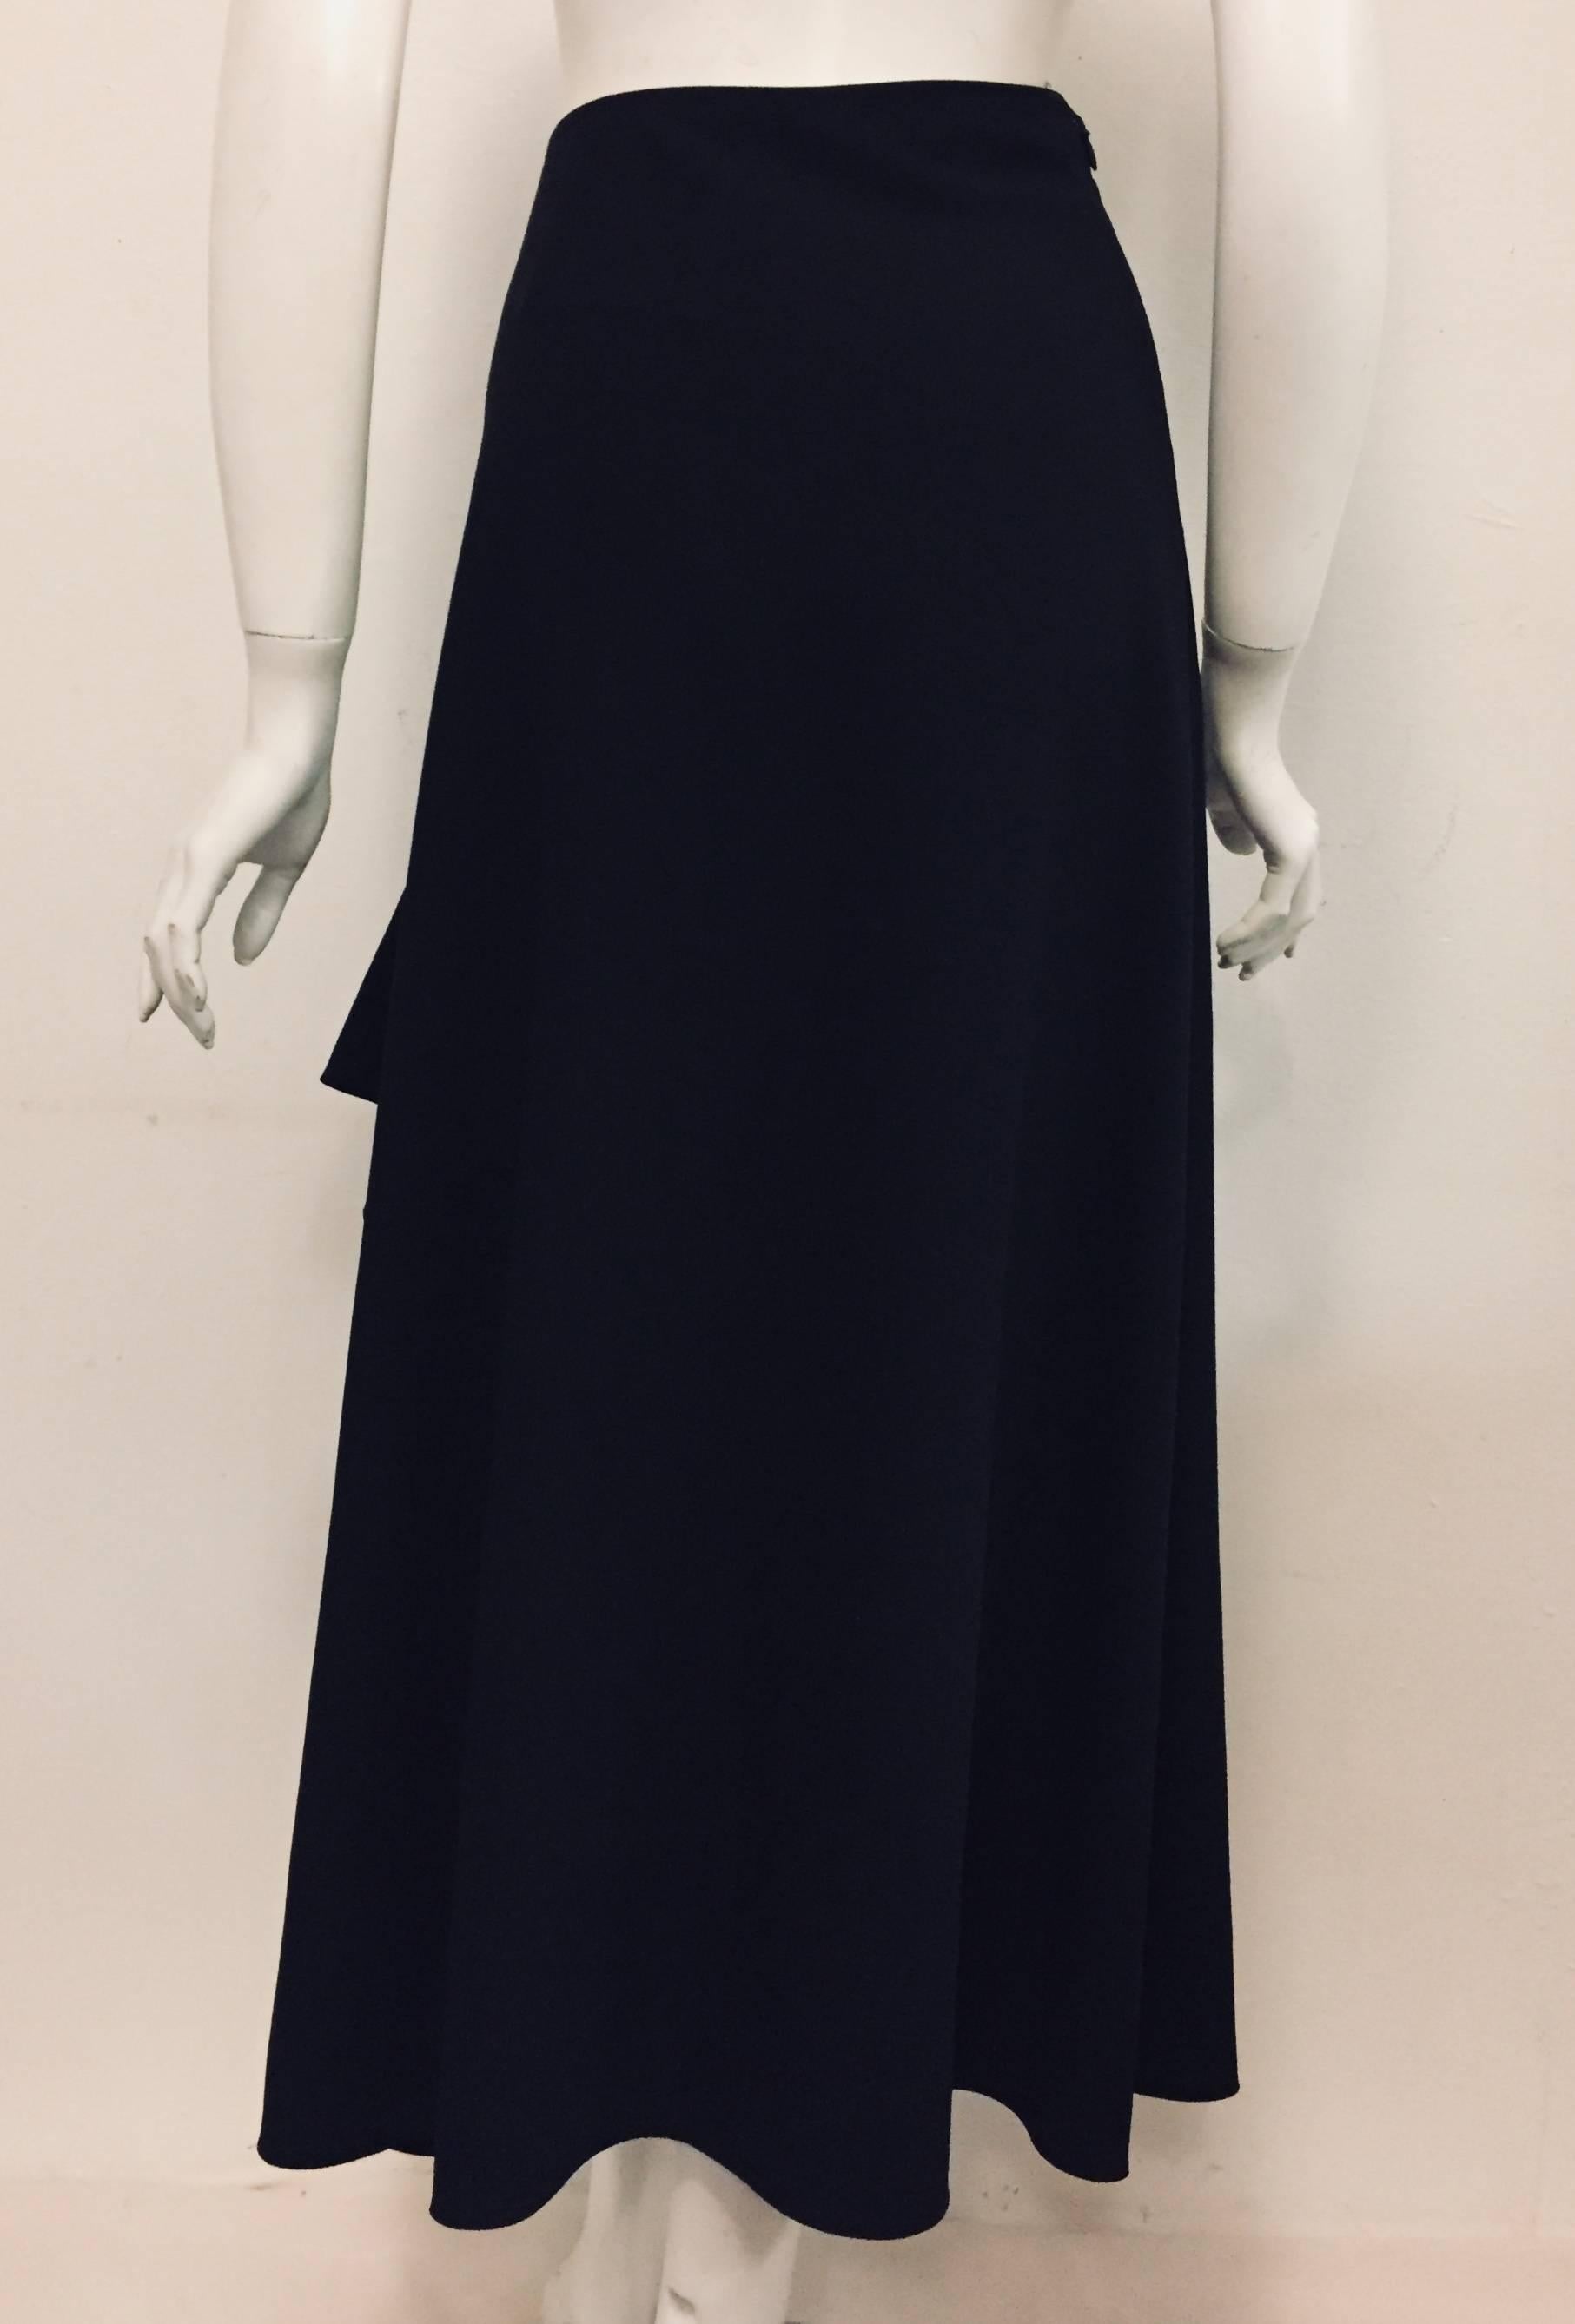 Black Valentino Wool Crepe and Silk Asymmetric Full Skirt with Appliques For Sale